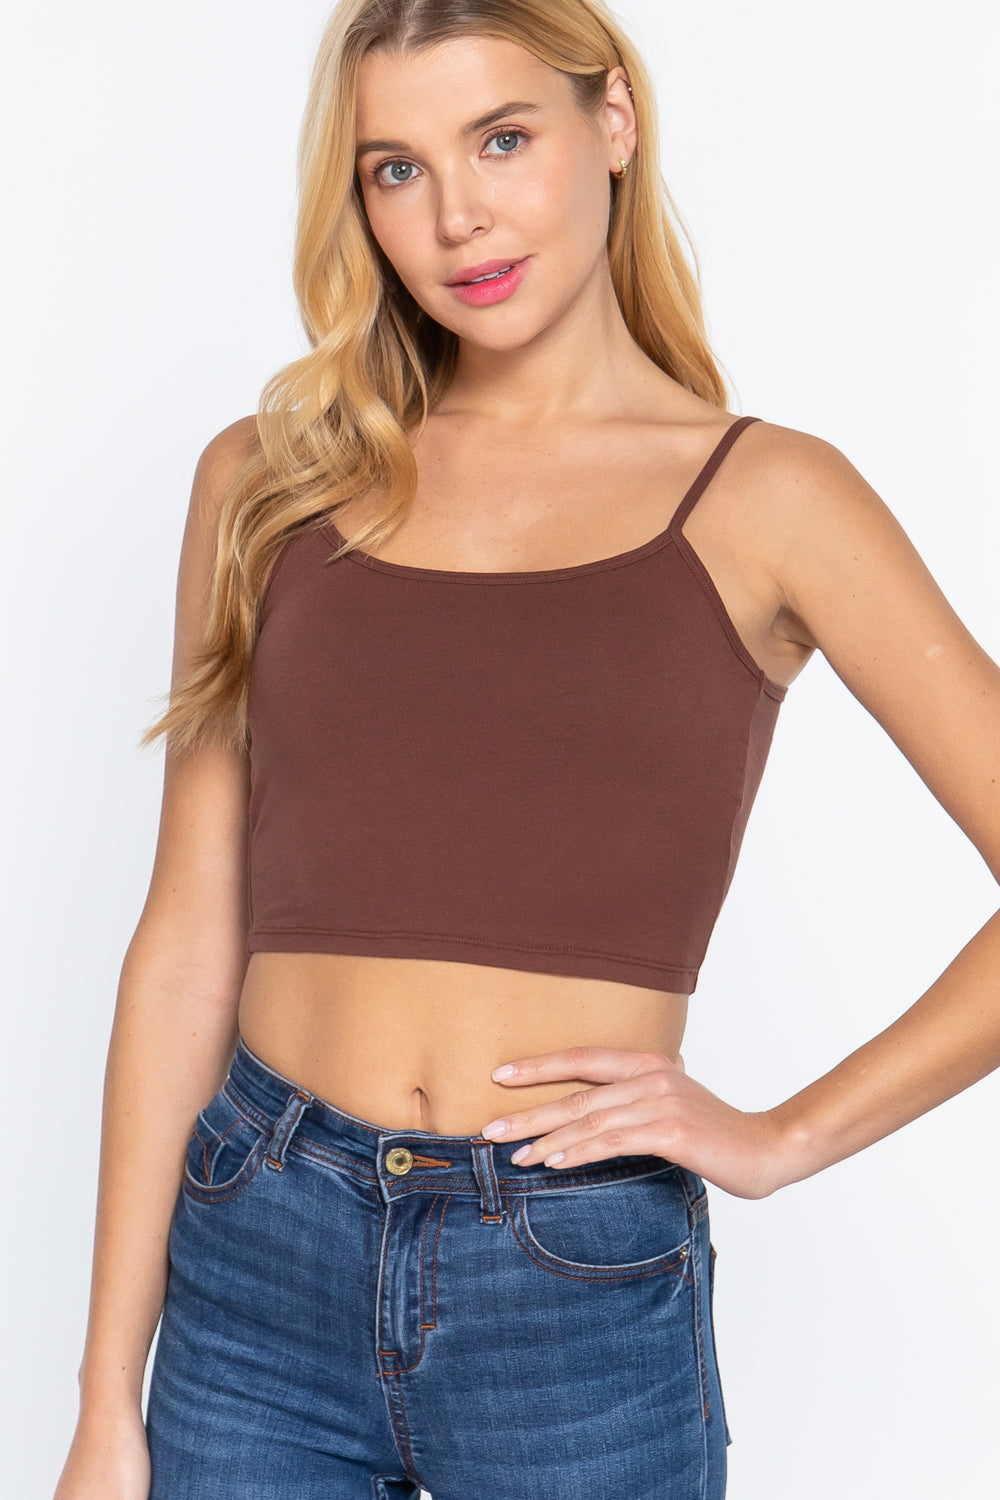 SEPIA Round Neck W/removable Bra Cup Cotton Spandex Bra Top - 17 colors - Ships from The USA - women's tank top at TFC&H Co.